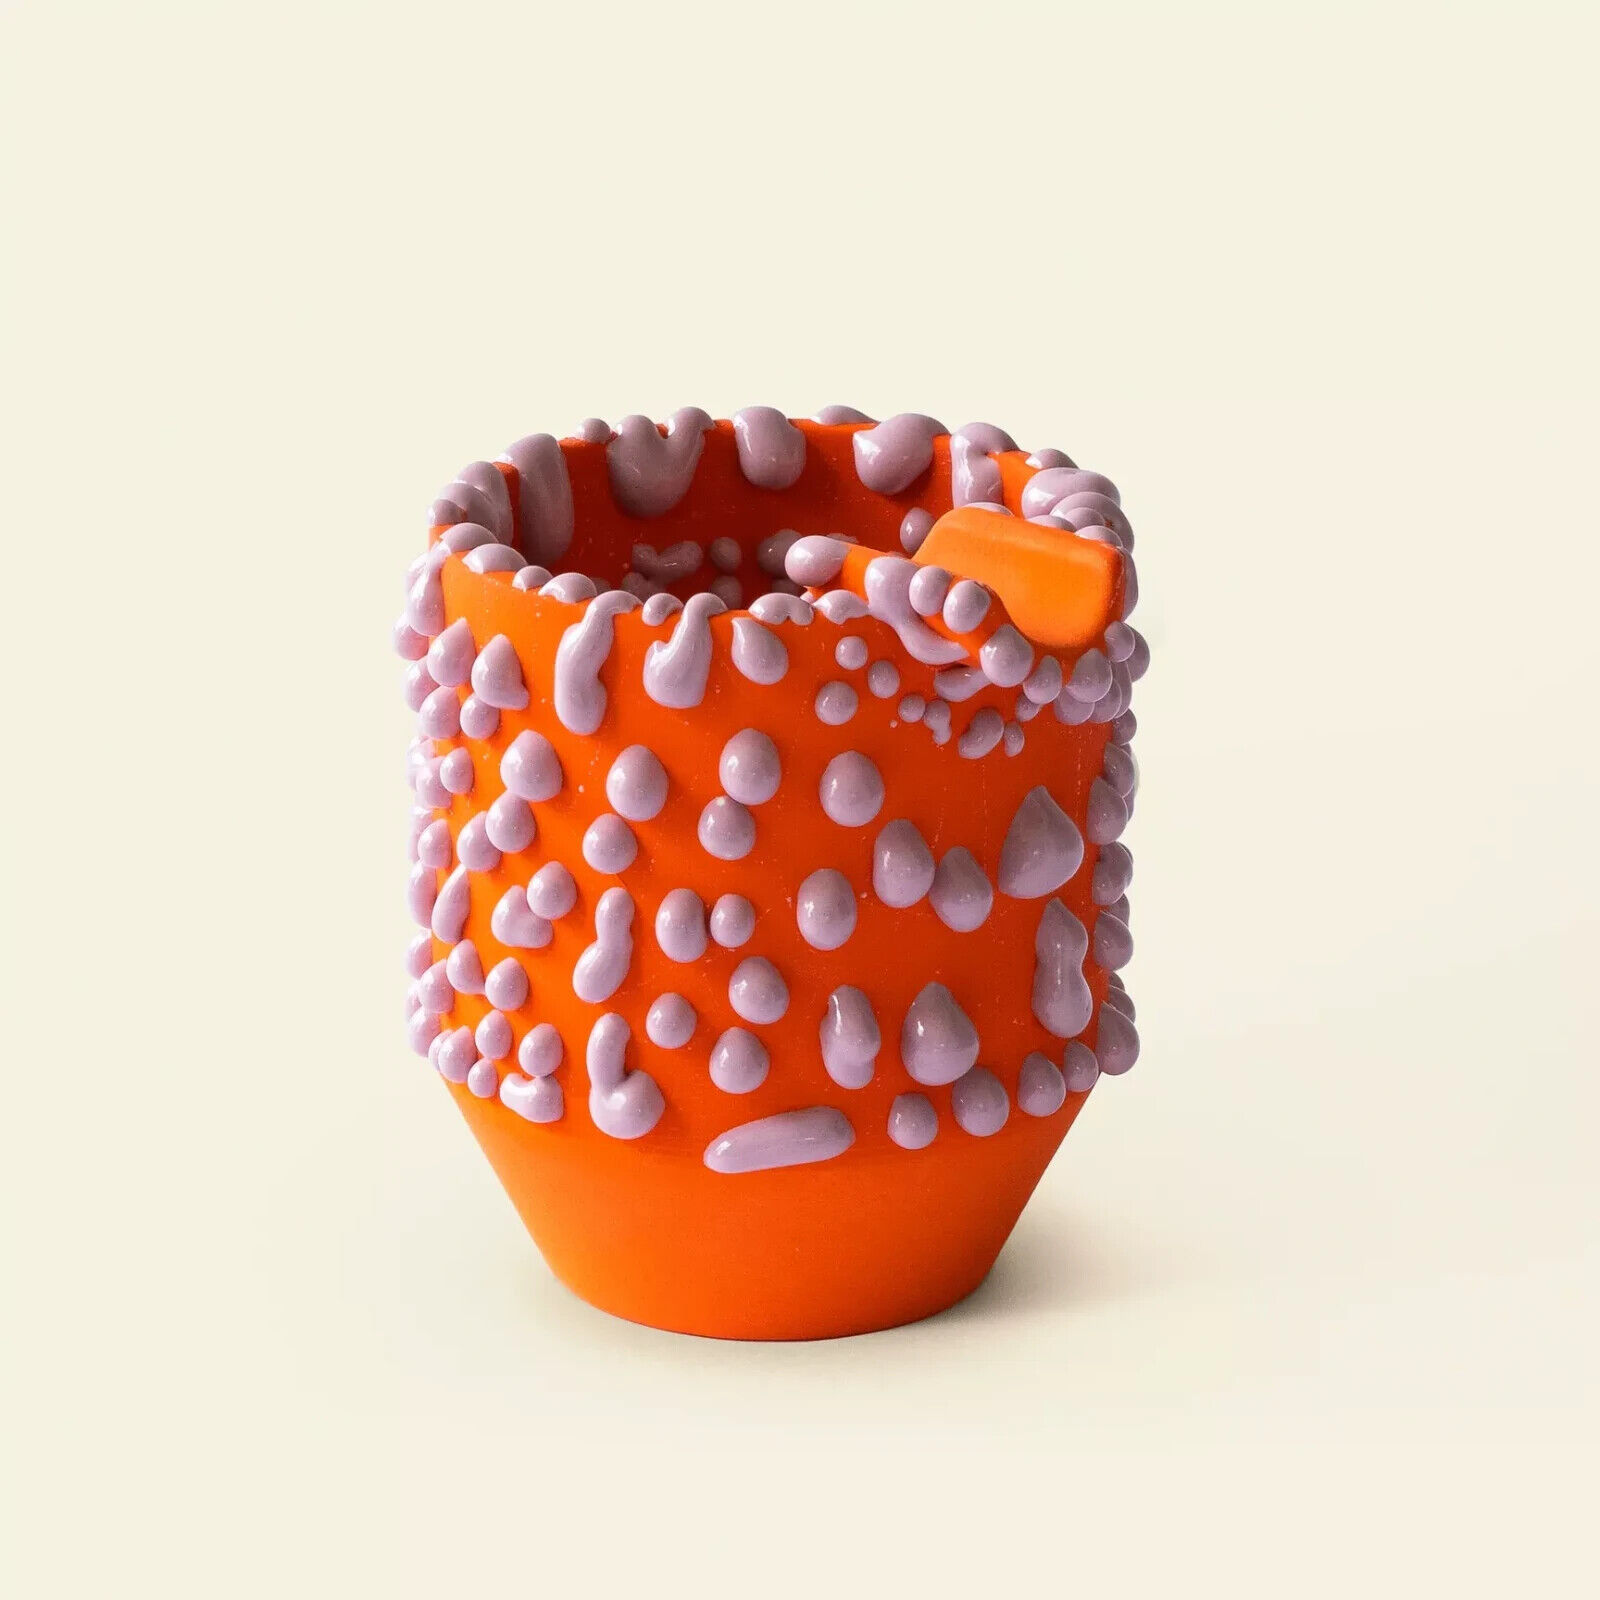 HOUSEPLANT Gloopy Ashtray - Orange & Lilac Limited Edition LE 500 by Seth Rogen